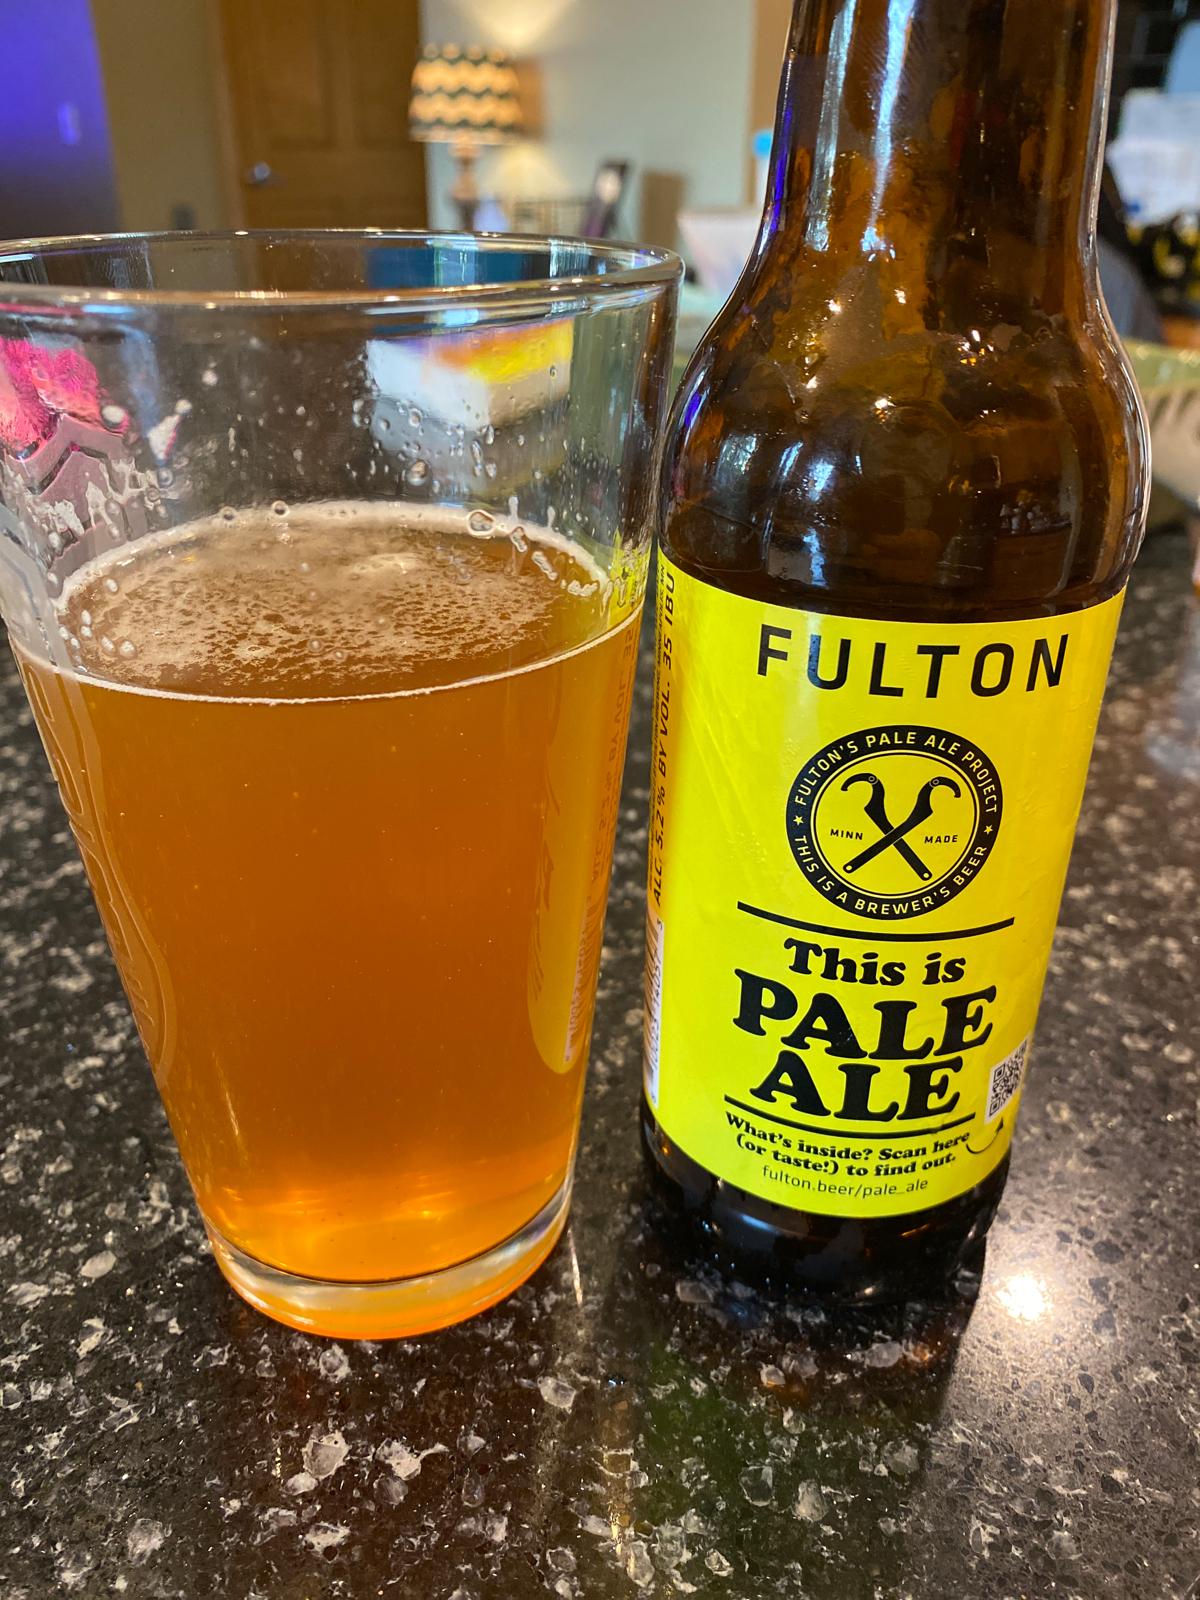 This Is Pale Ale